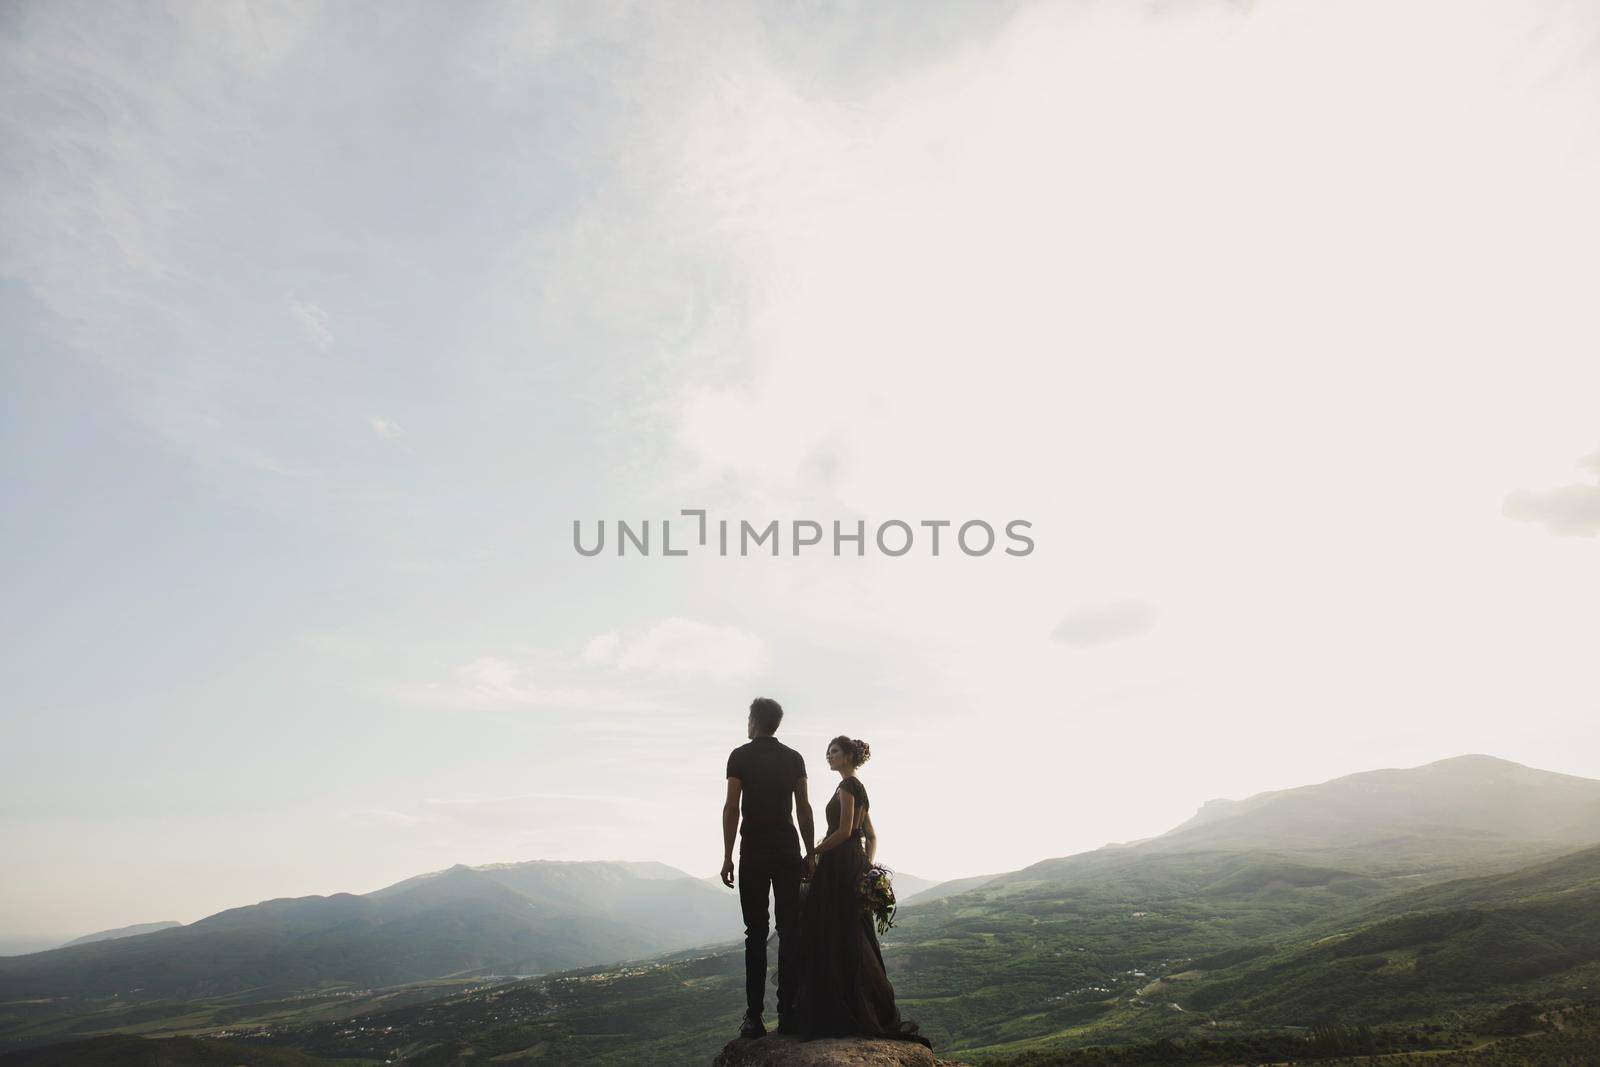 Woman and man in black clothes outdoors. Black wedding dress.